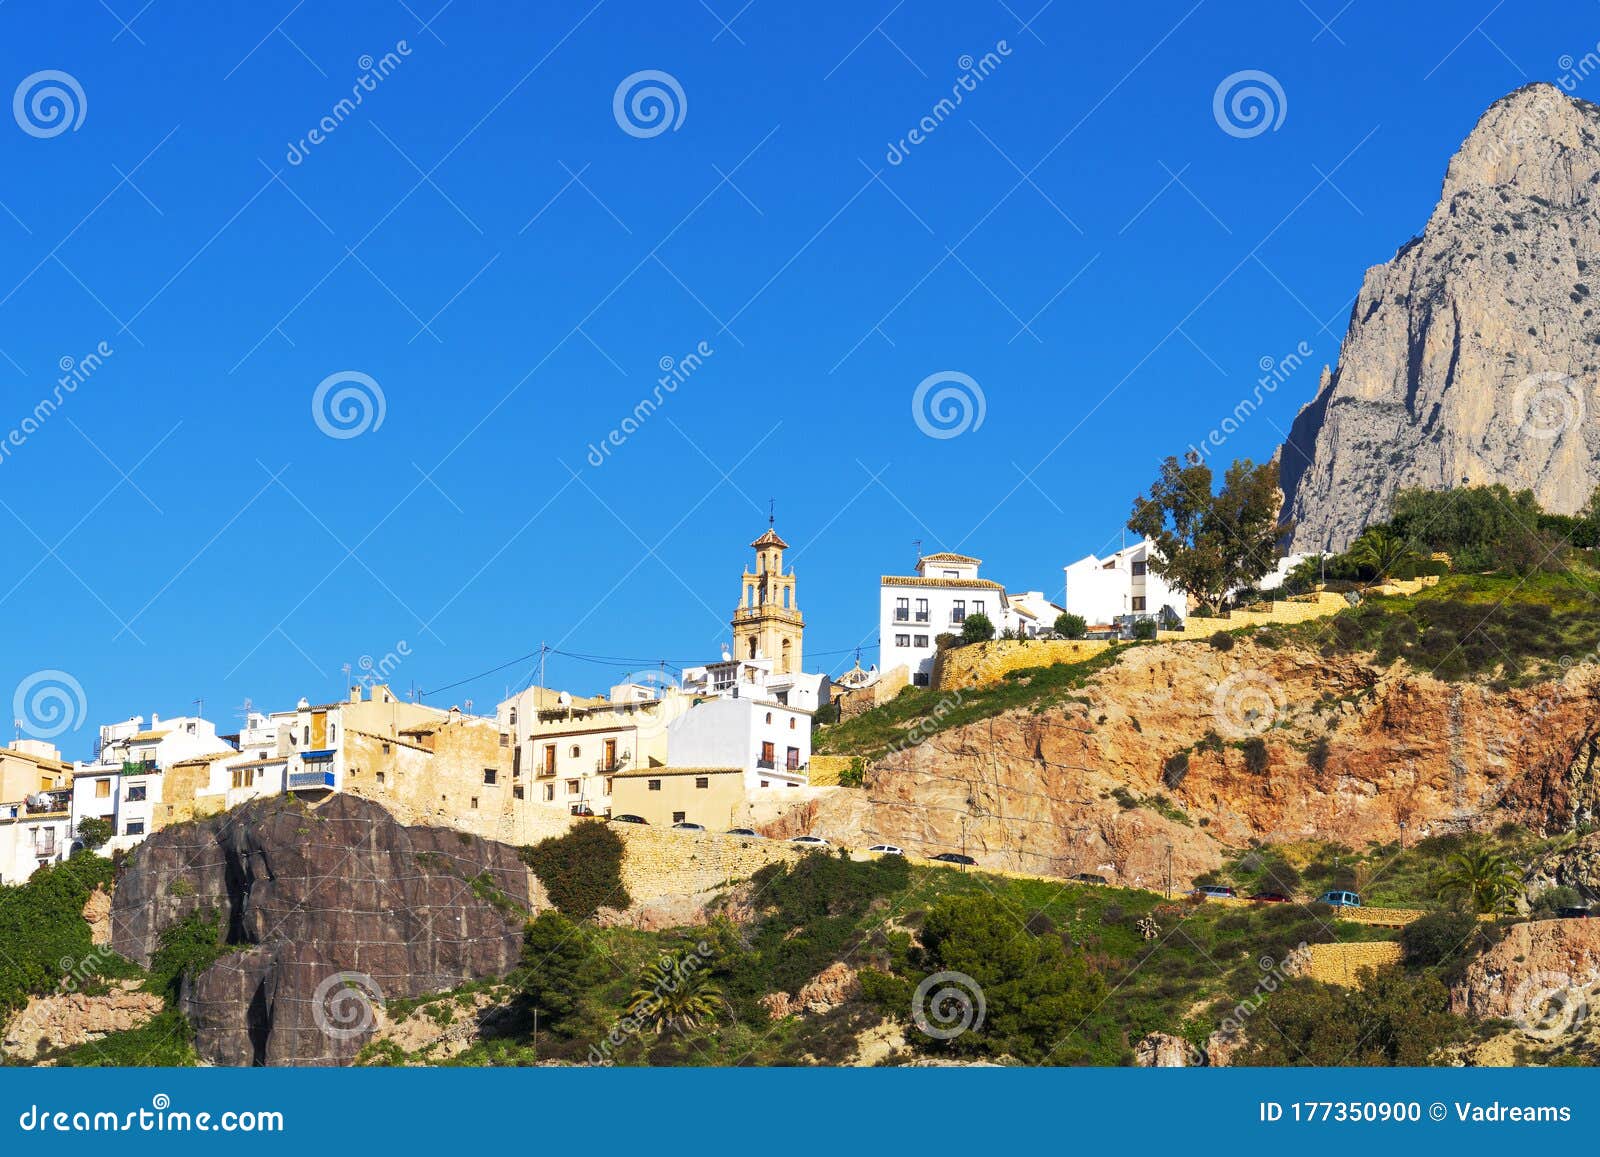 small beautiful village finestrat and puig campana mountain in costa blanca, spain europe